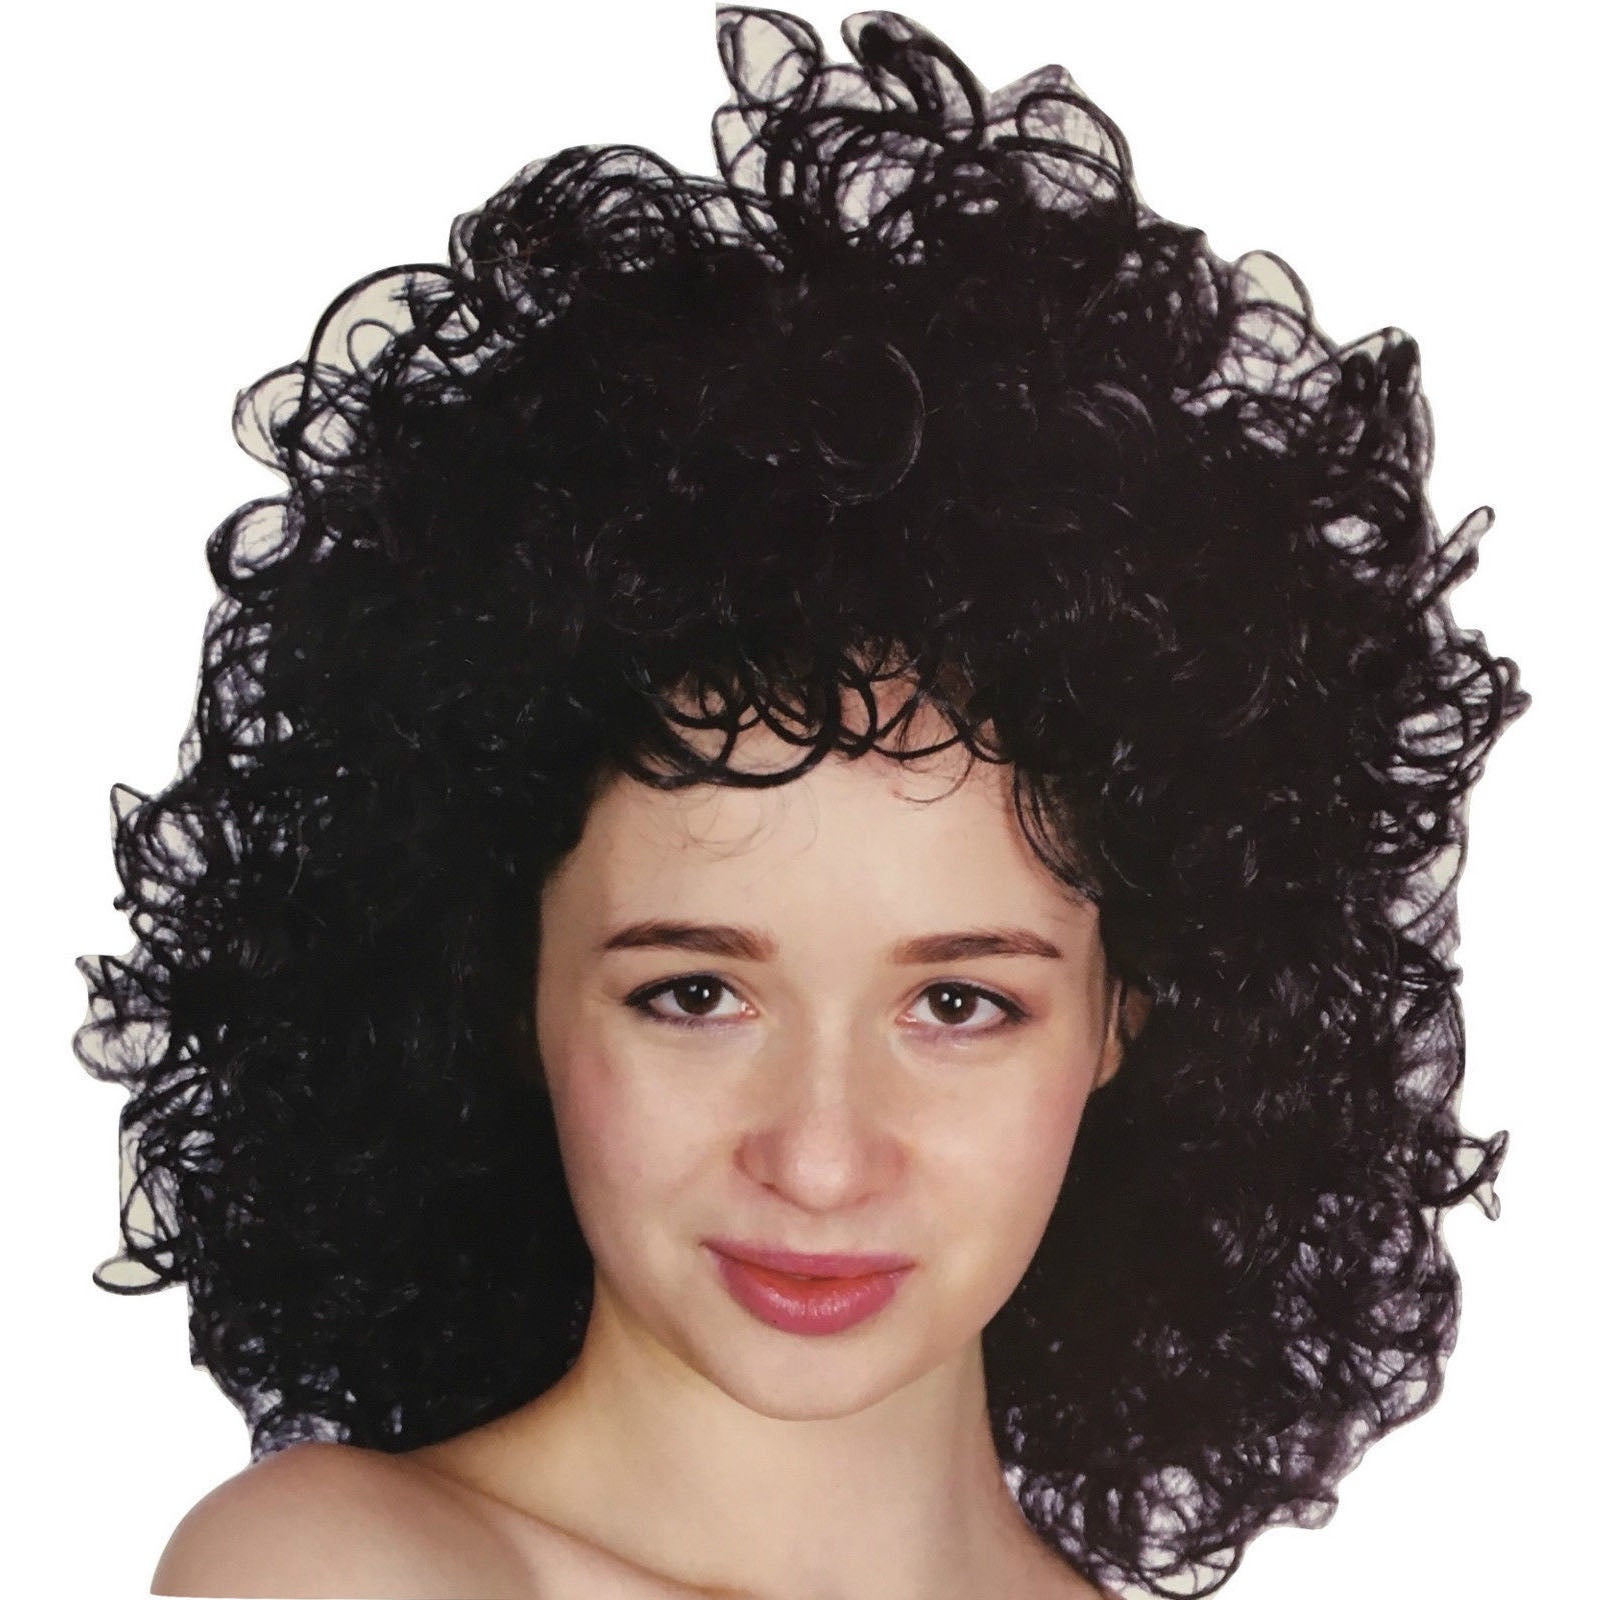 LONG CURLY WIG Hair Costume Cosplay Party Wavy Fancy Dress Ladies Accessory